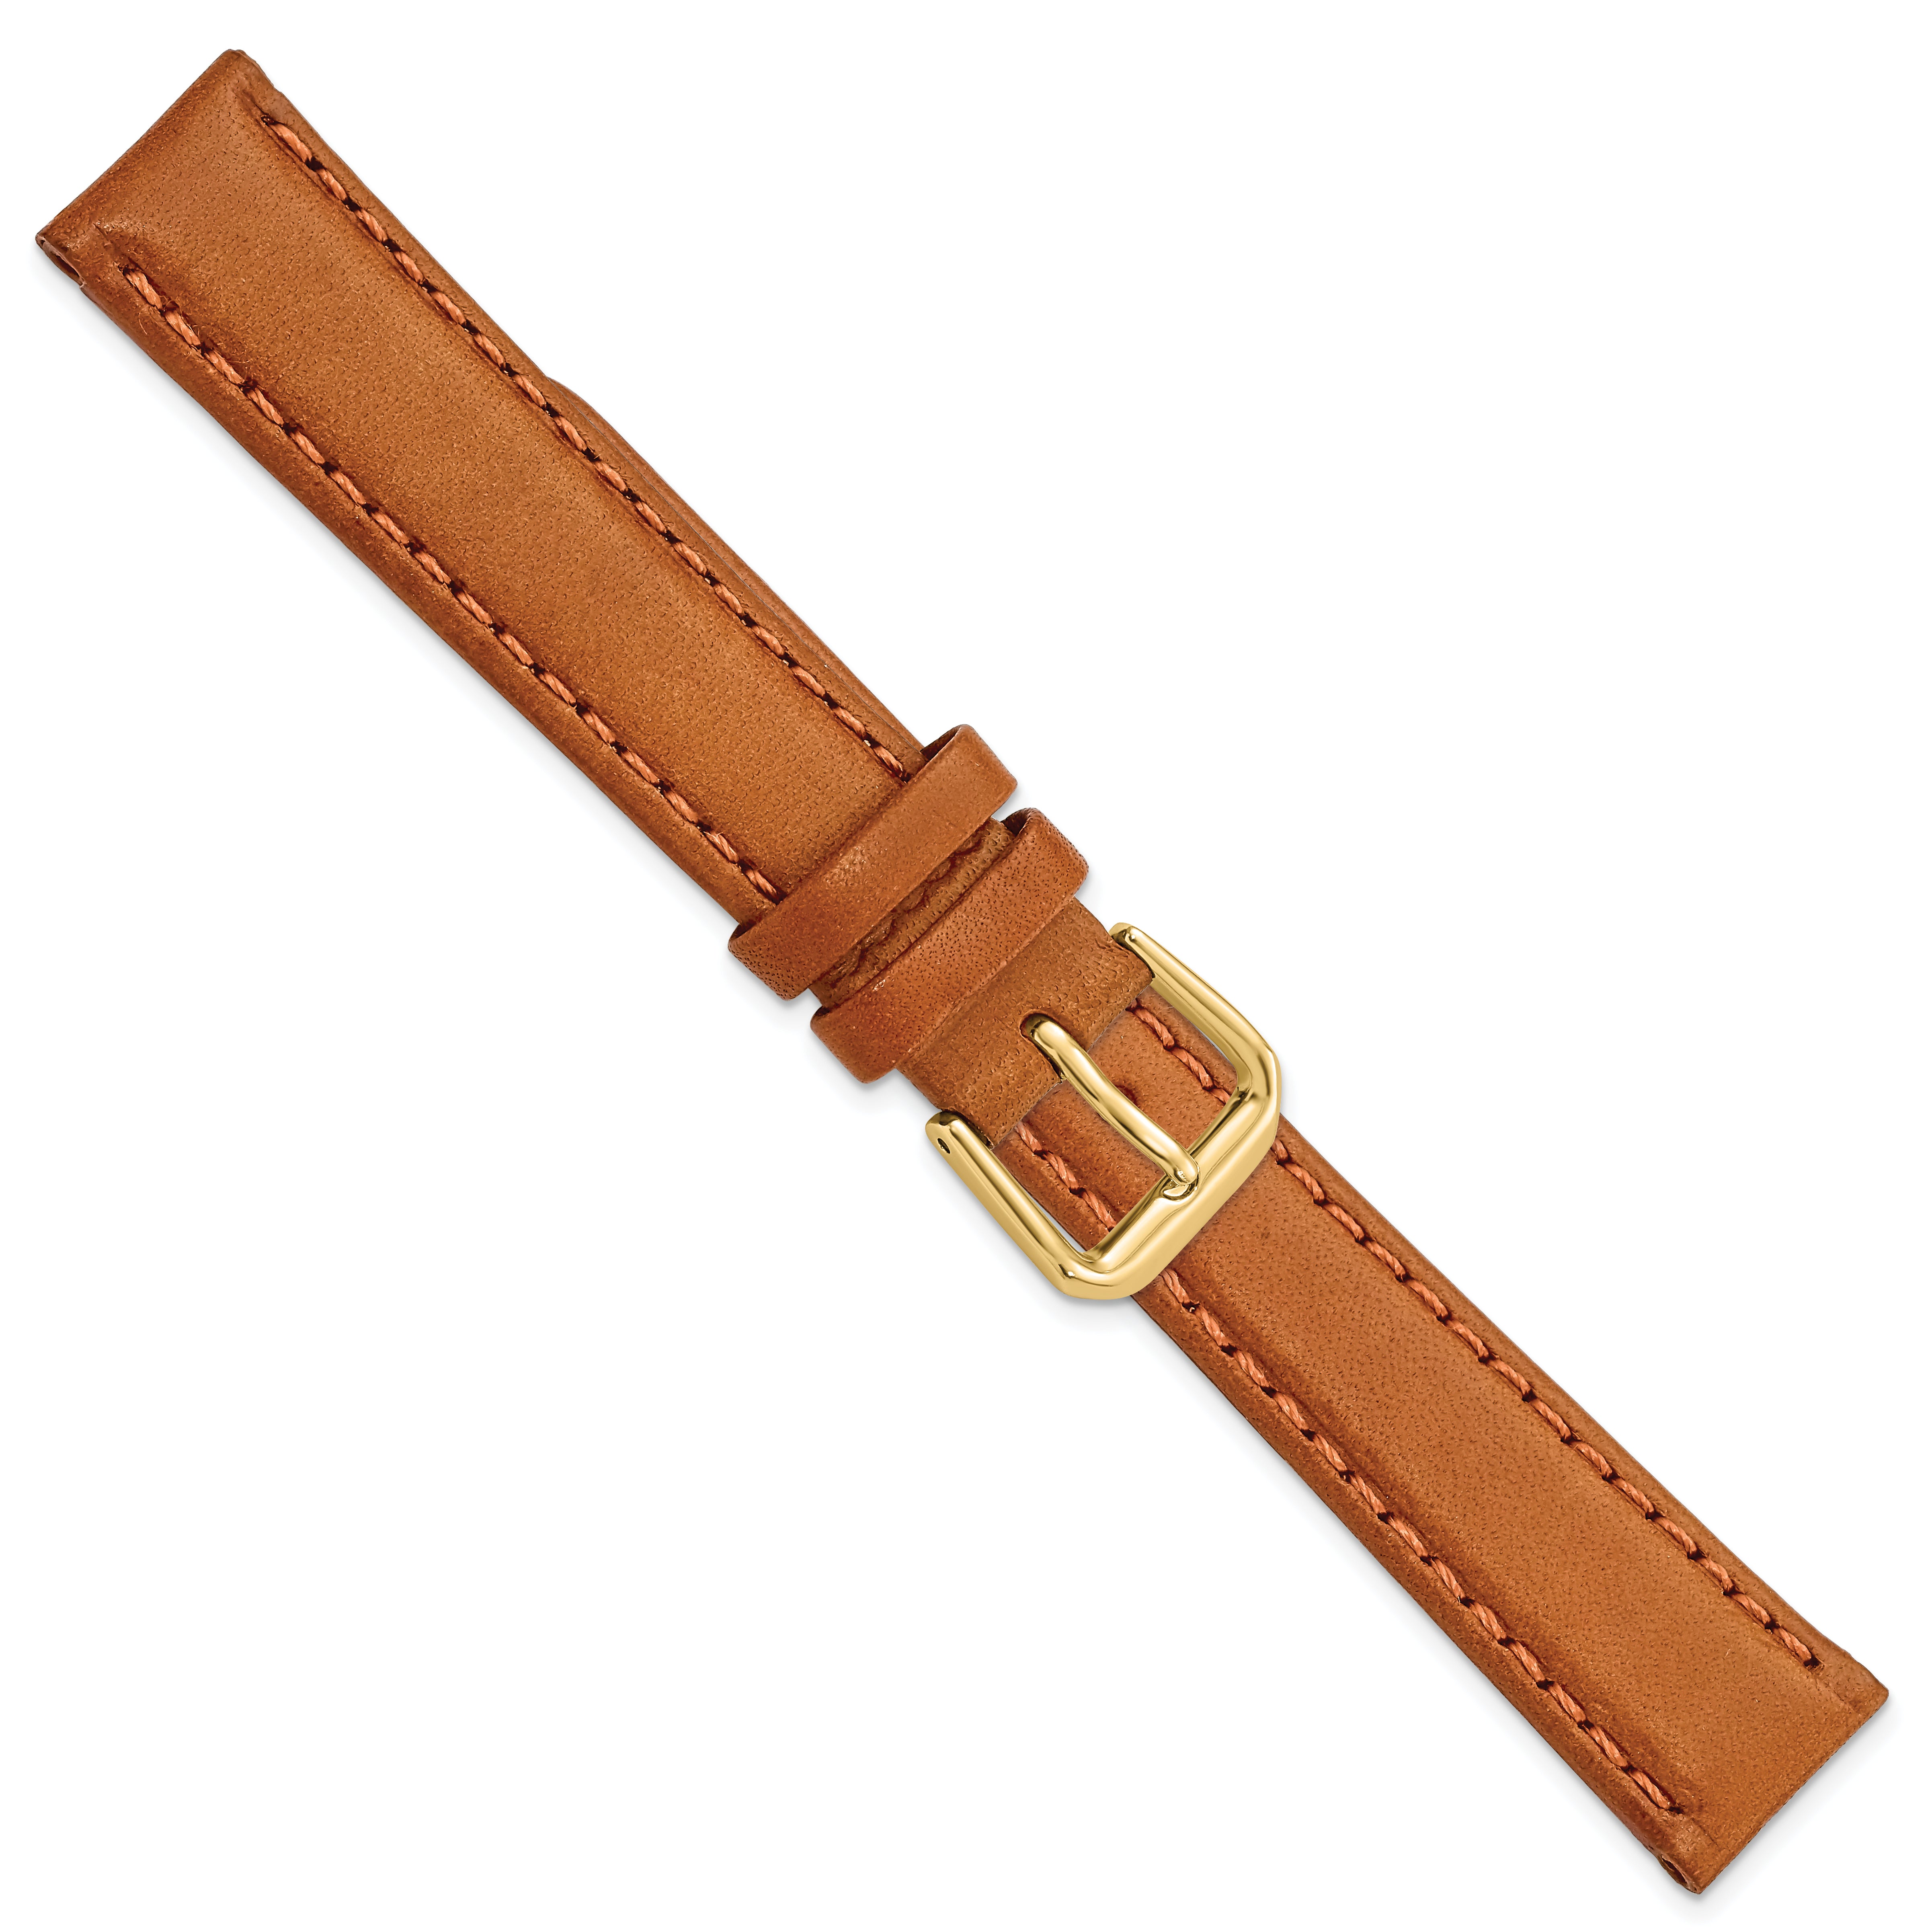 14mm Havana Italian Leather with Gold-tone Buckle 6.75 inch Watch Band